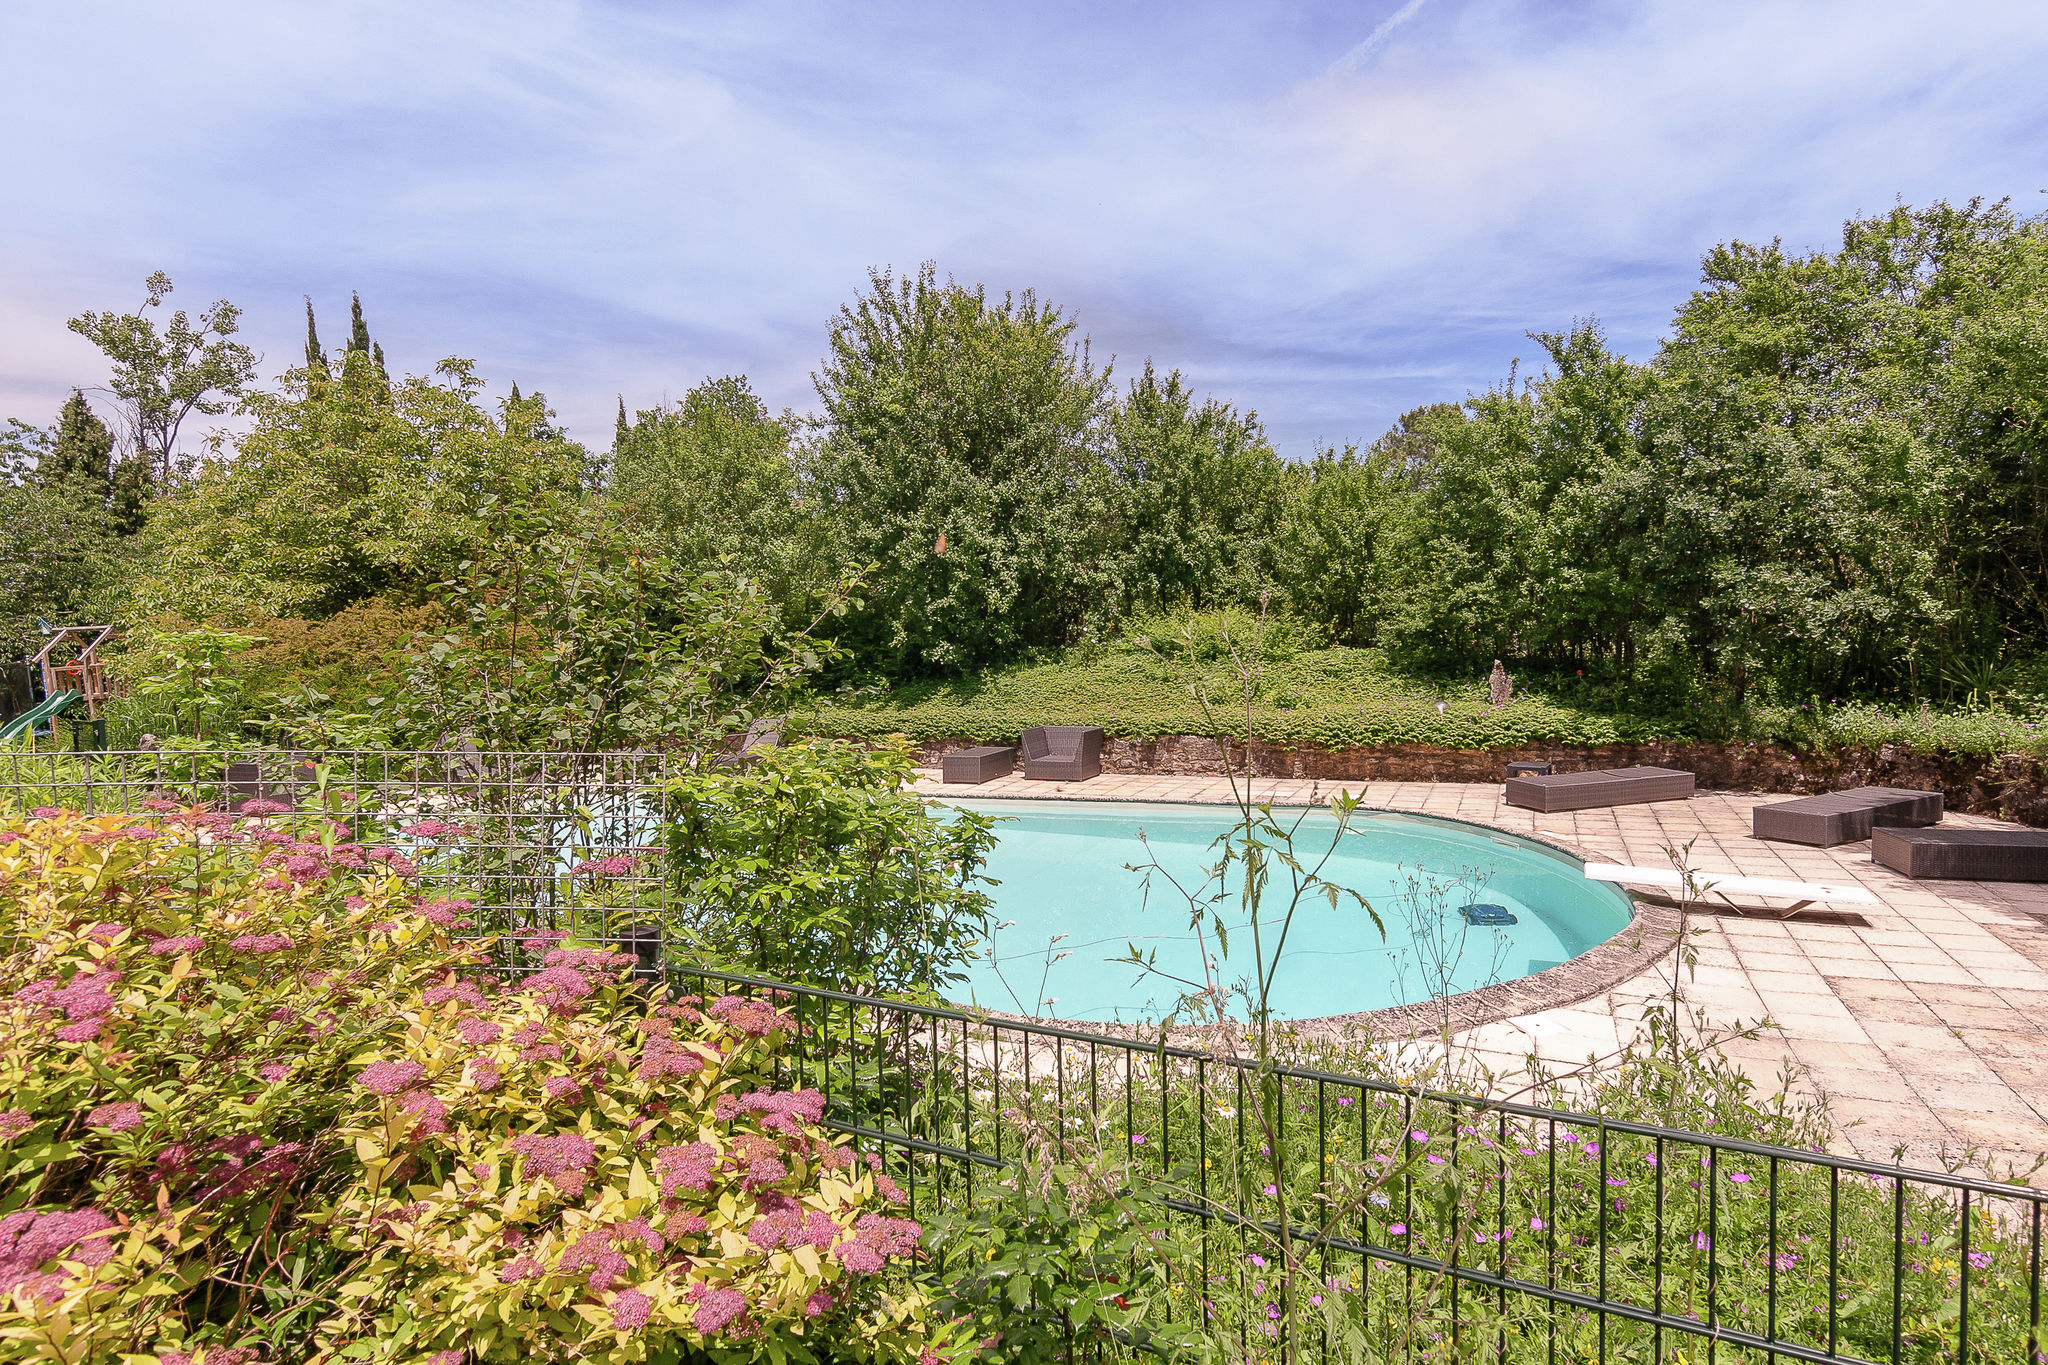 Family house in a fairytale hamlet with a beautiful swimming pool